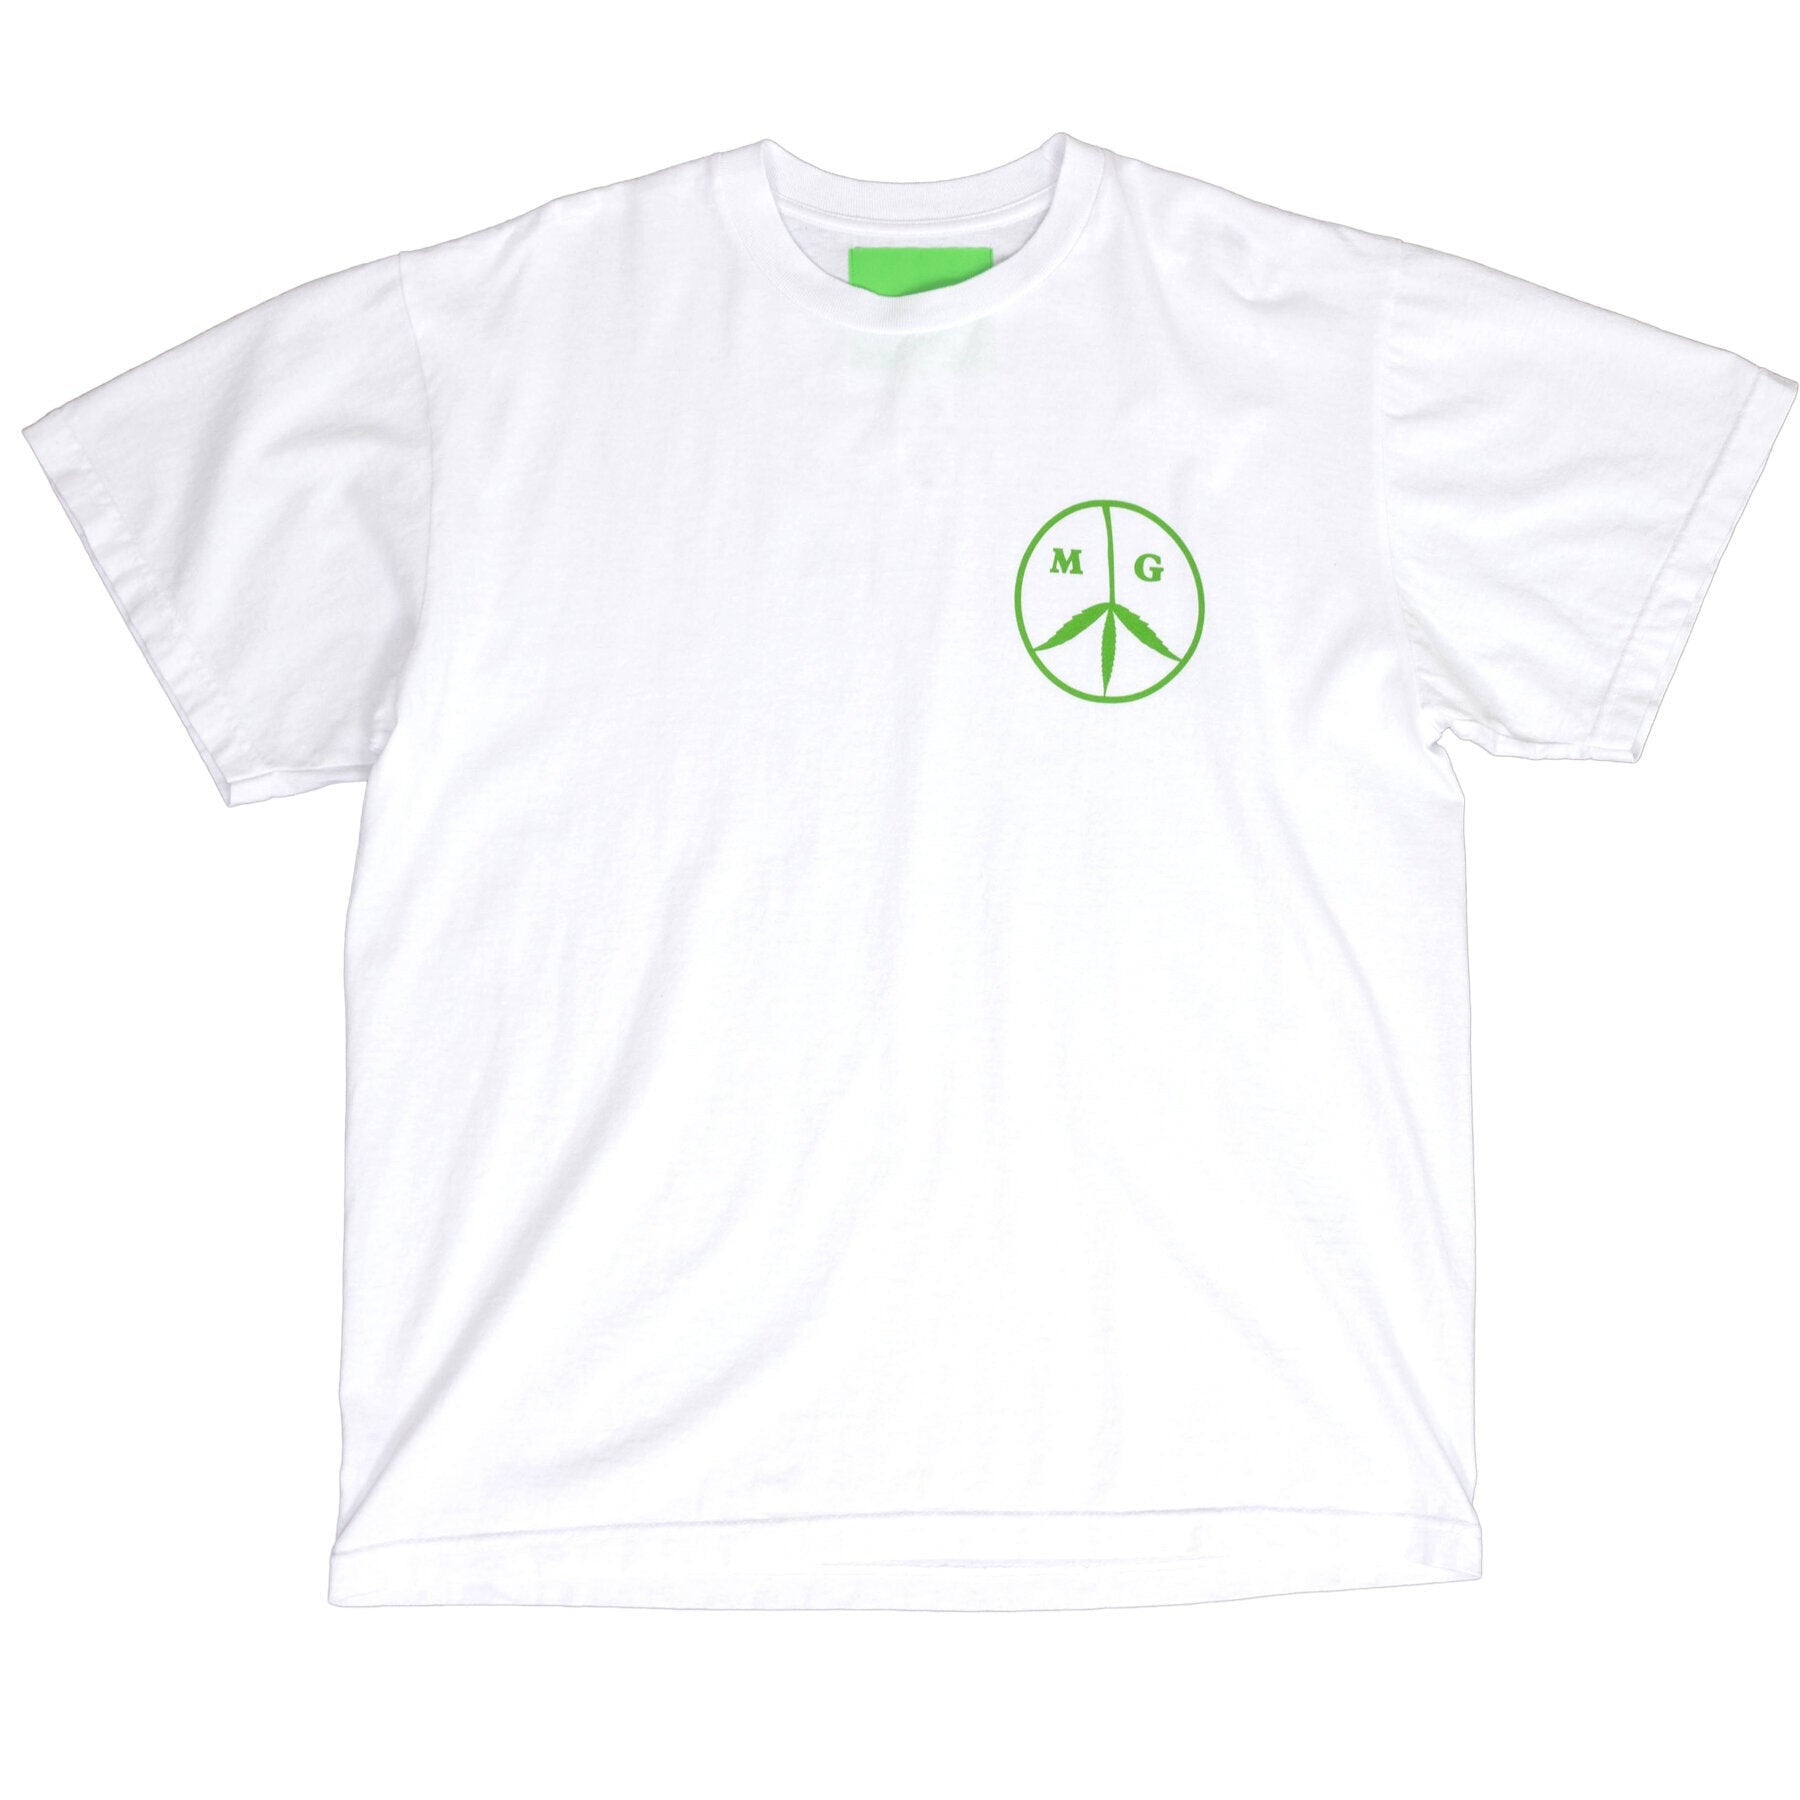 Aquarian Airlines Tee - White-Mister Green-Mister Green